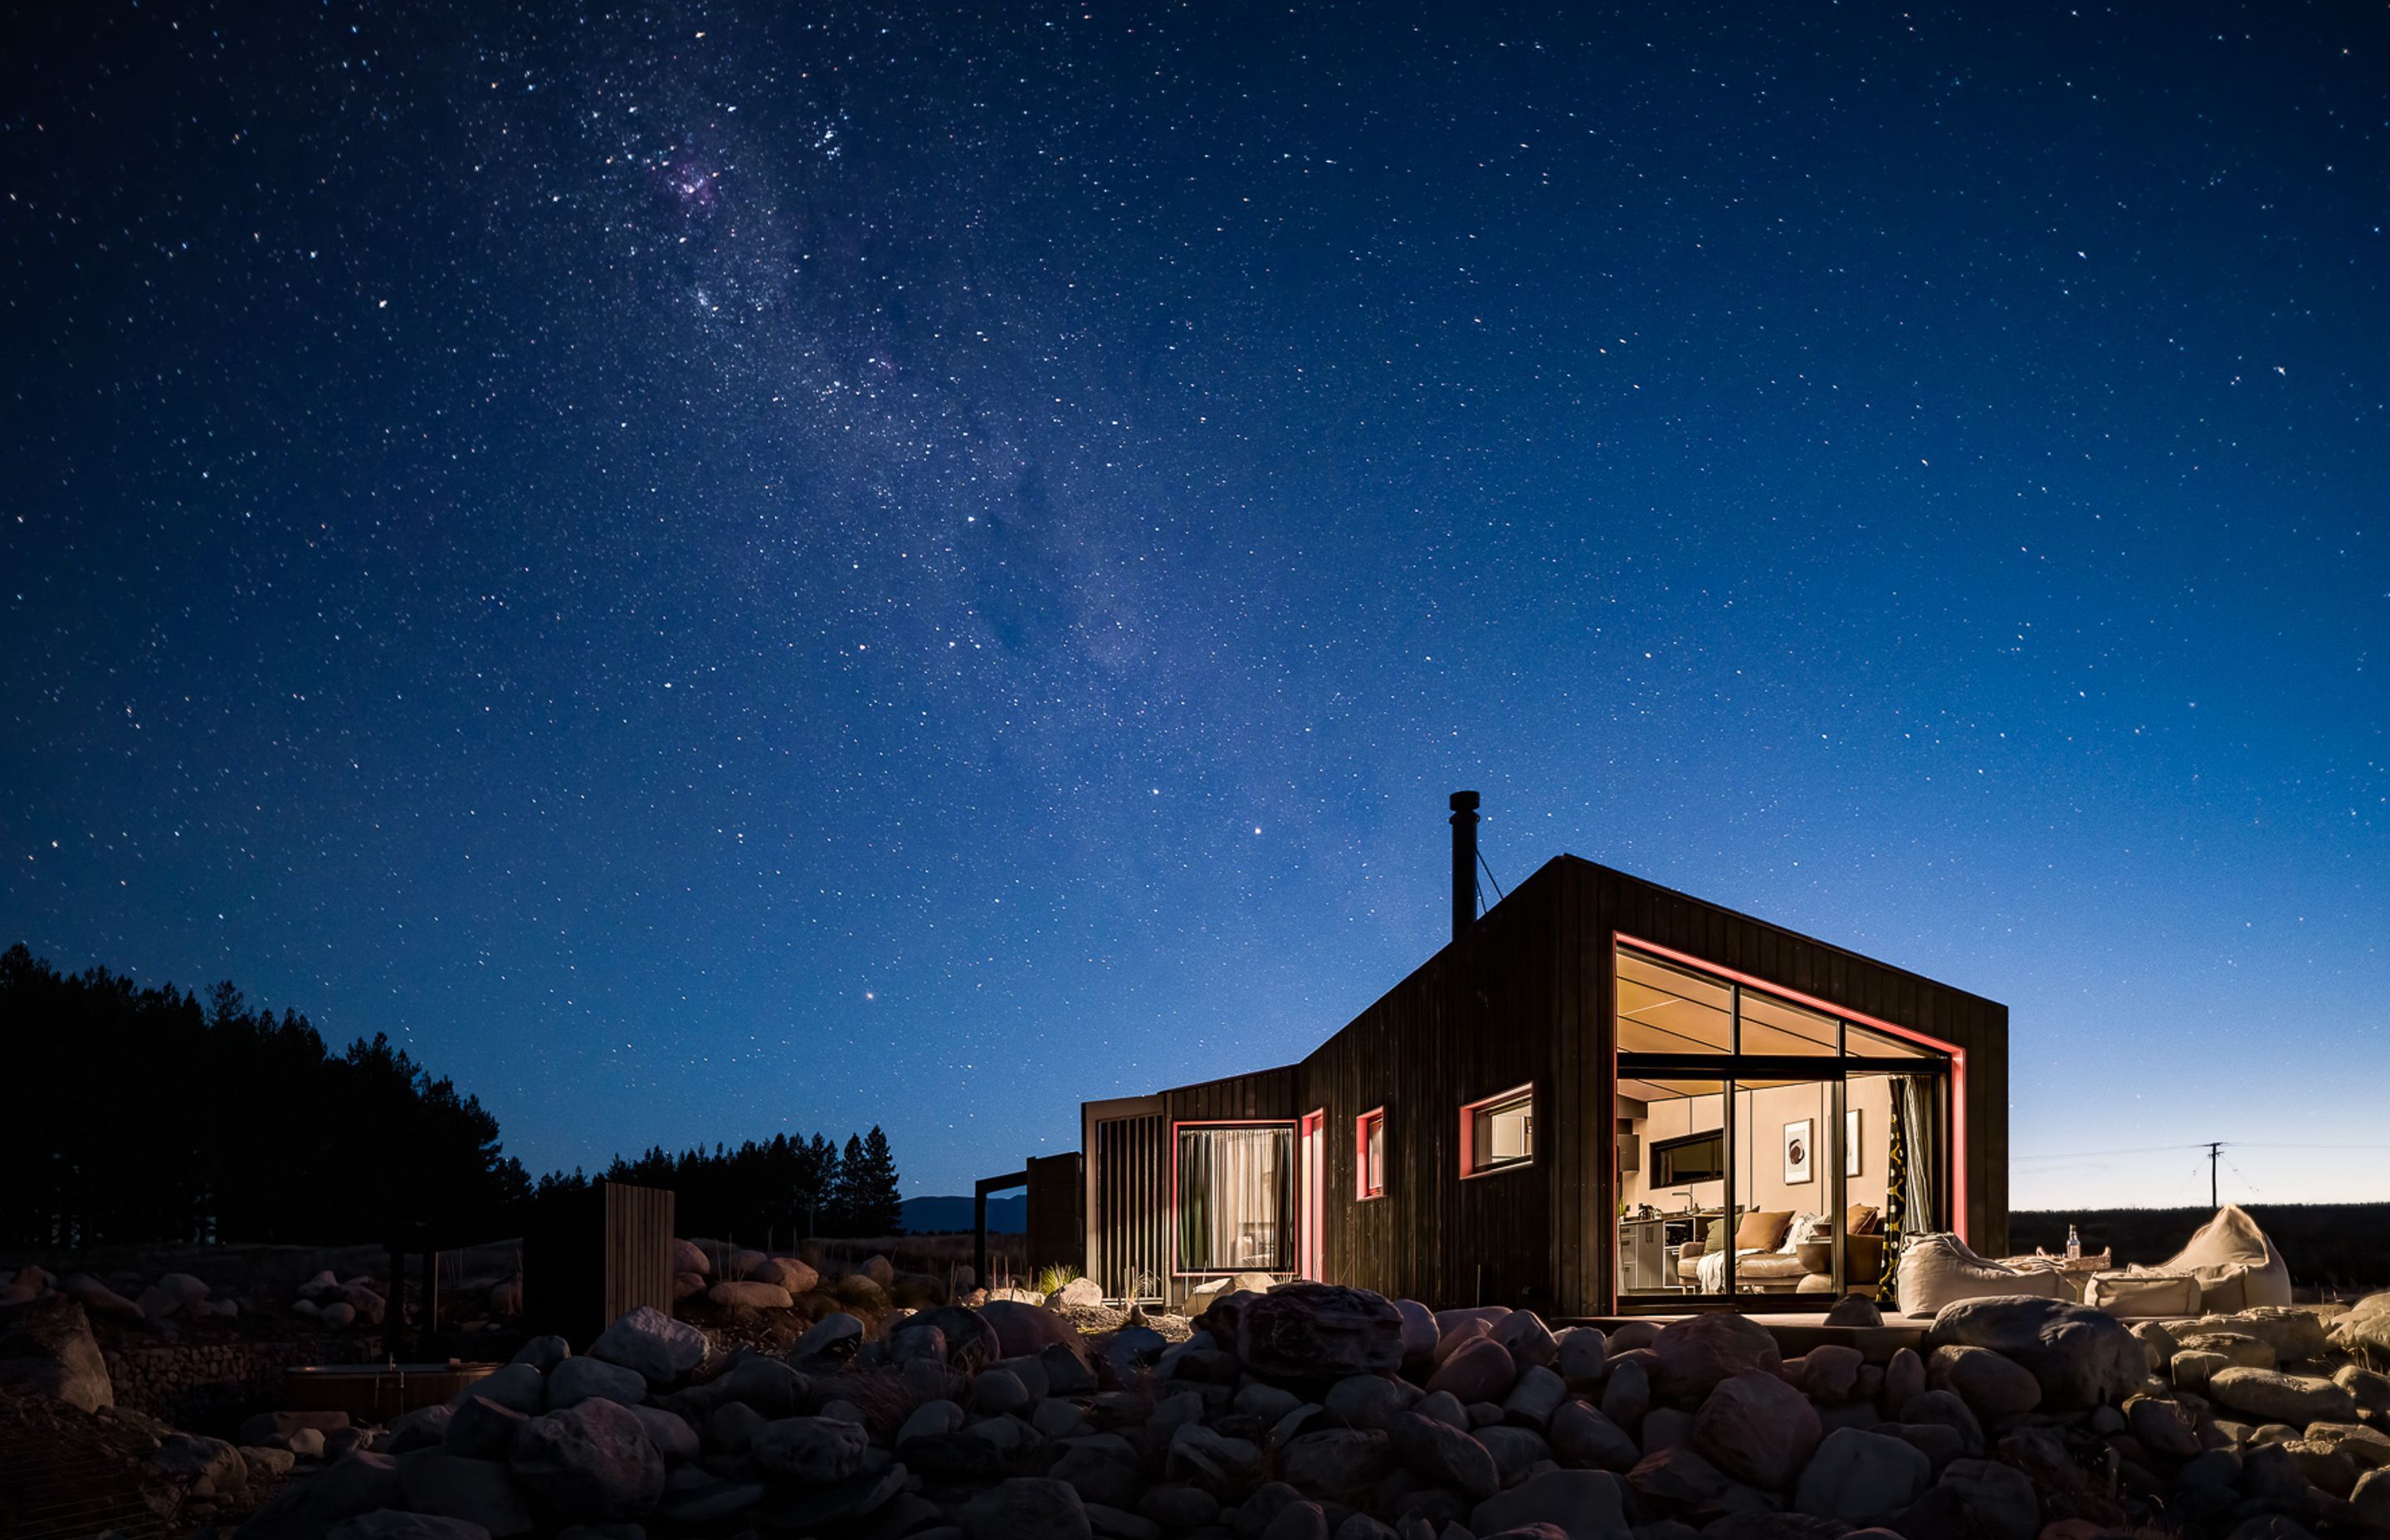 Located on the outskirts of Twizel, the cabin enjoys views of the prized and protected Mackenzie Aoraki Dark Sky Reserve.